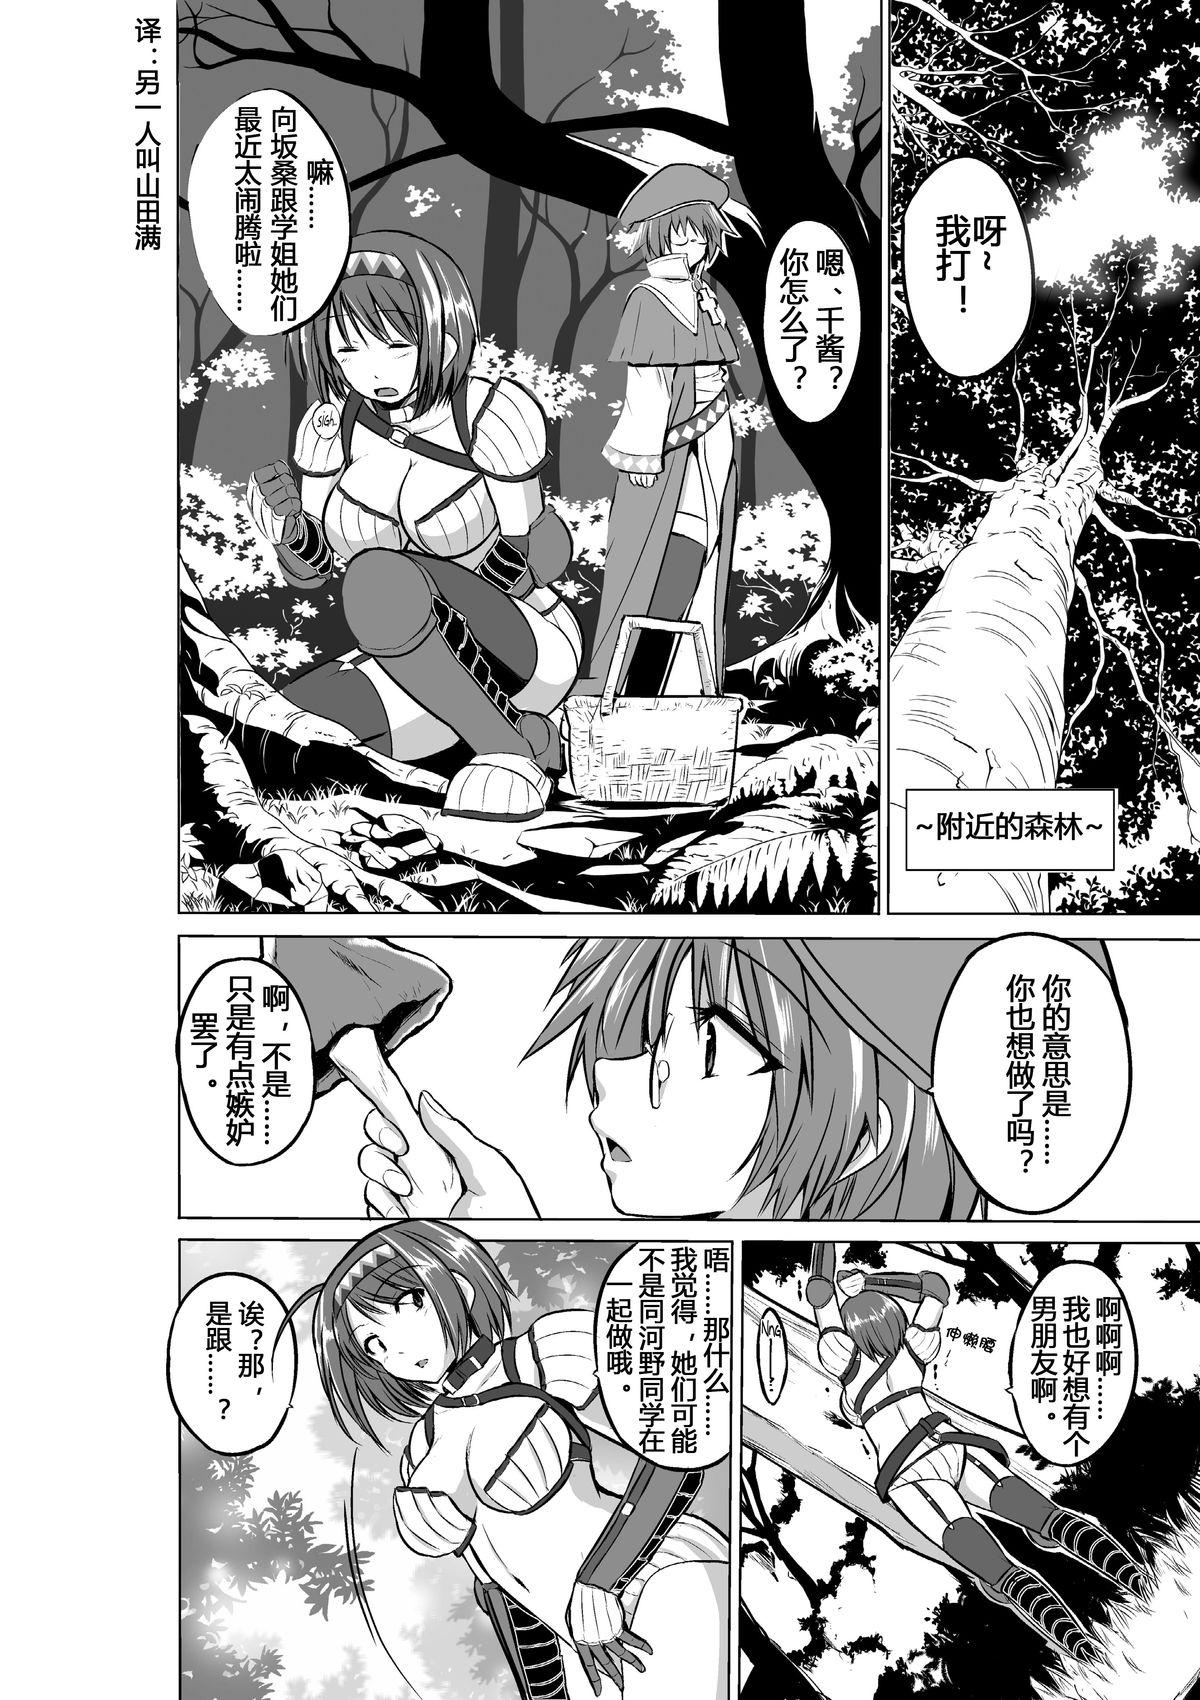 Crossdresser Dungeon Travelers - Chie no Himegoto - Toheart2 Homosexual - Page 4